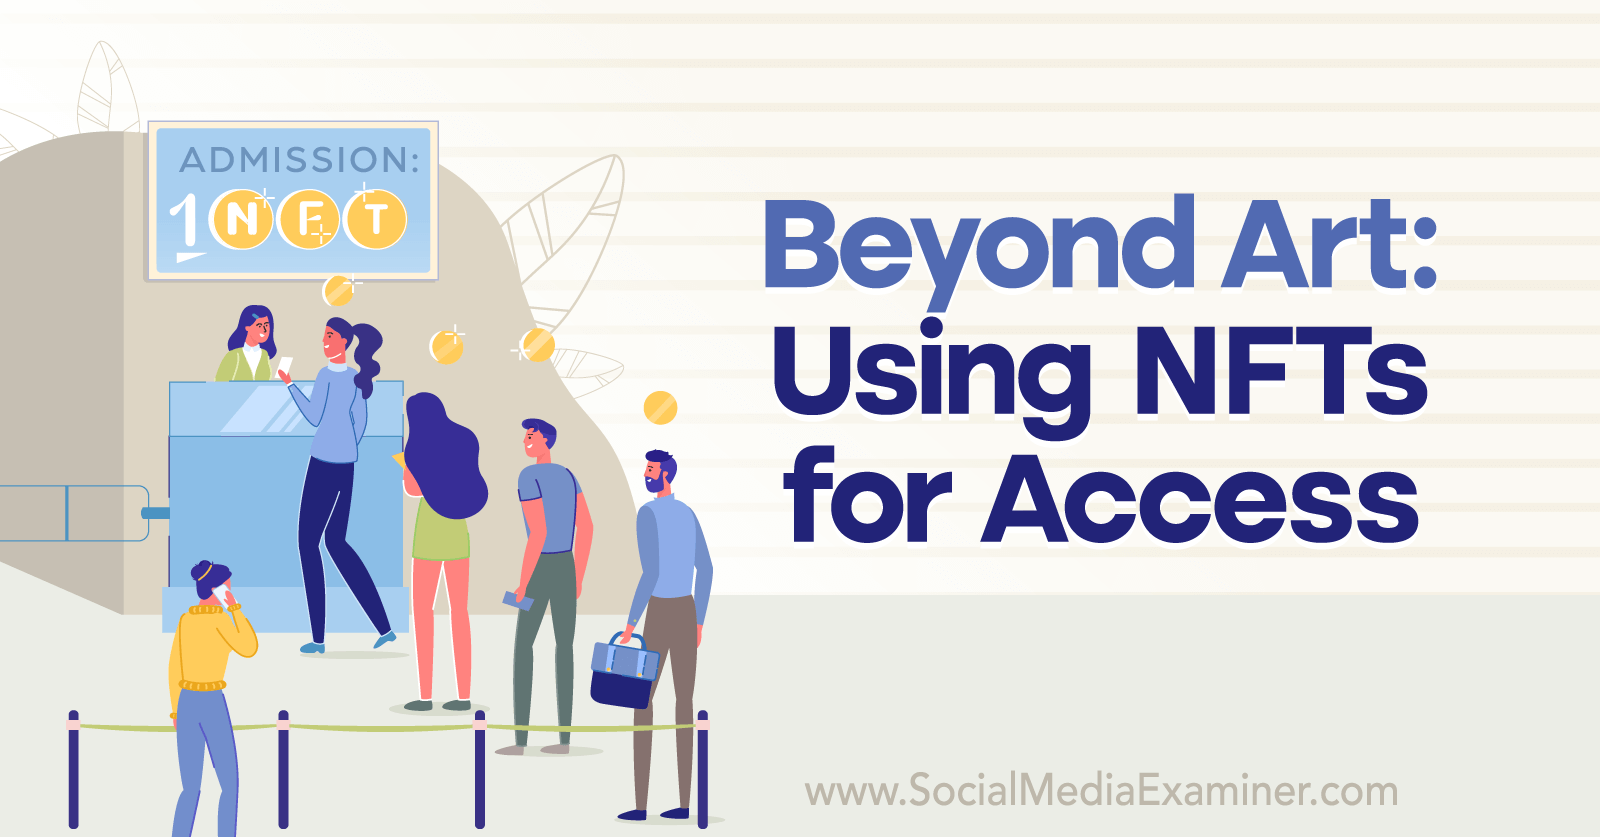 Beyond Art: Using NFTs for Access featuring insights from Joe Pulizzi on the Crypto Business Podcast.